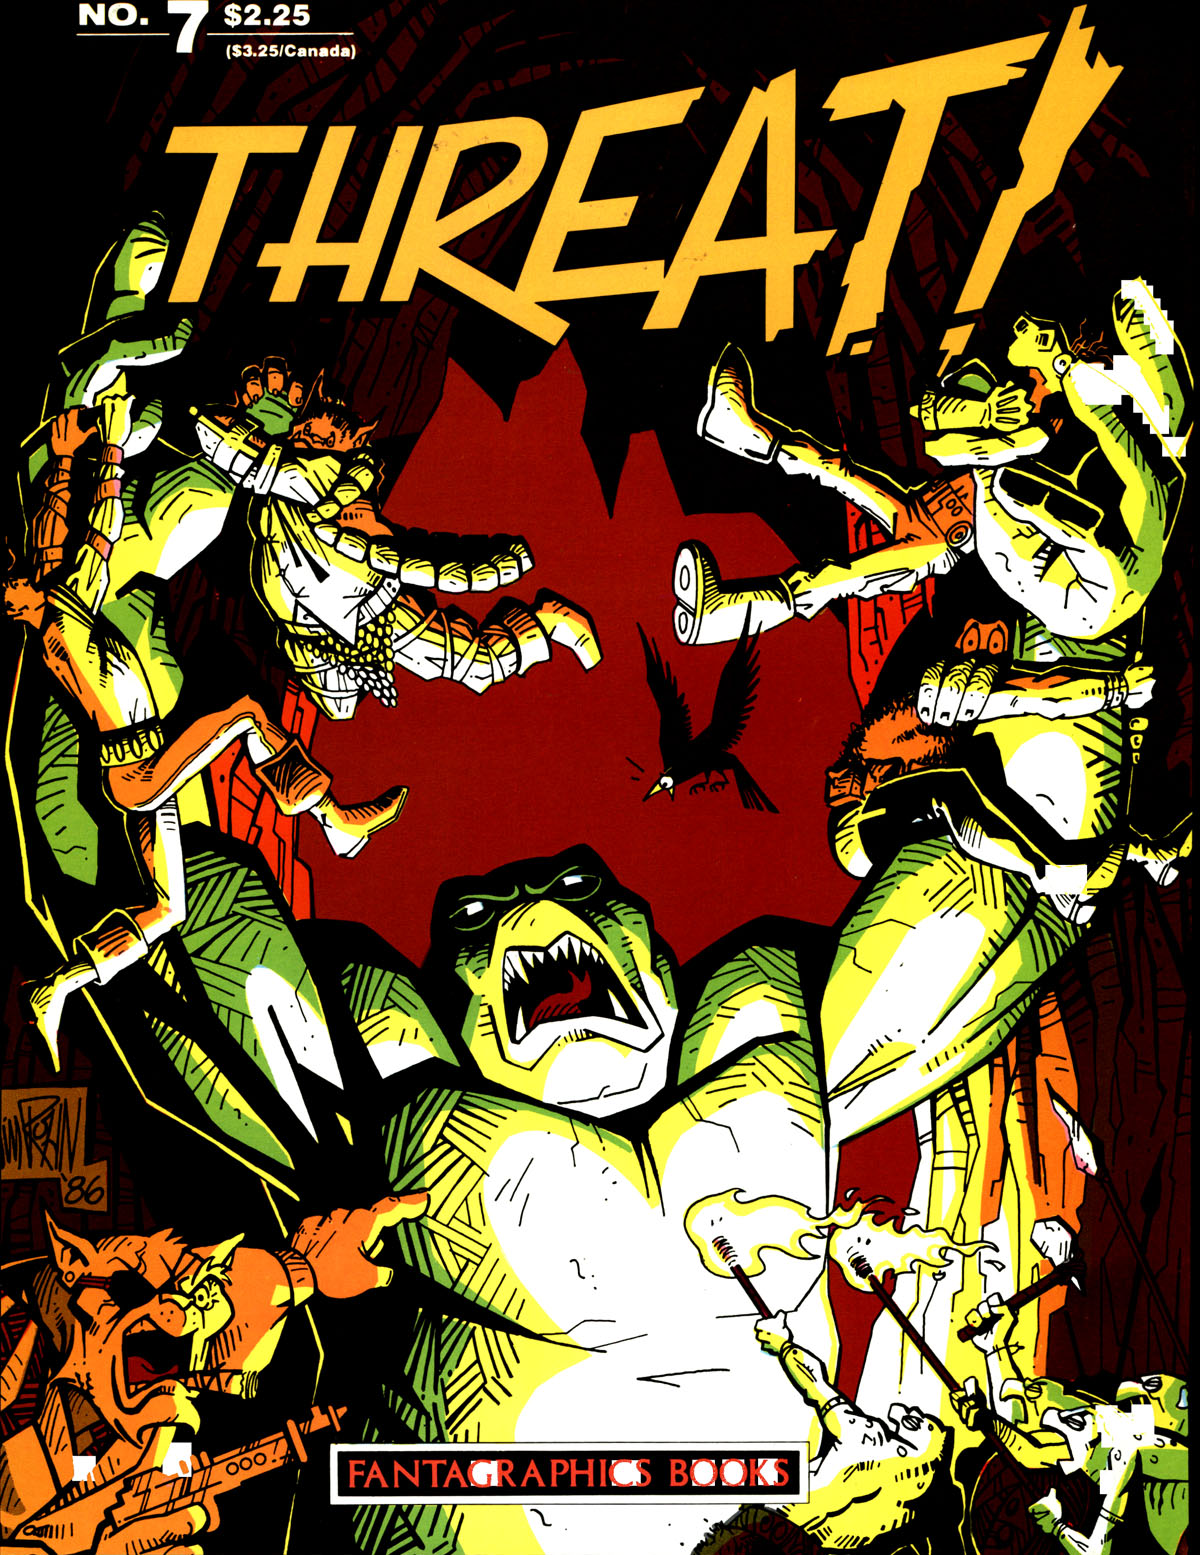 Read online Threat comic -  Issue #7 - 1